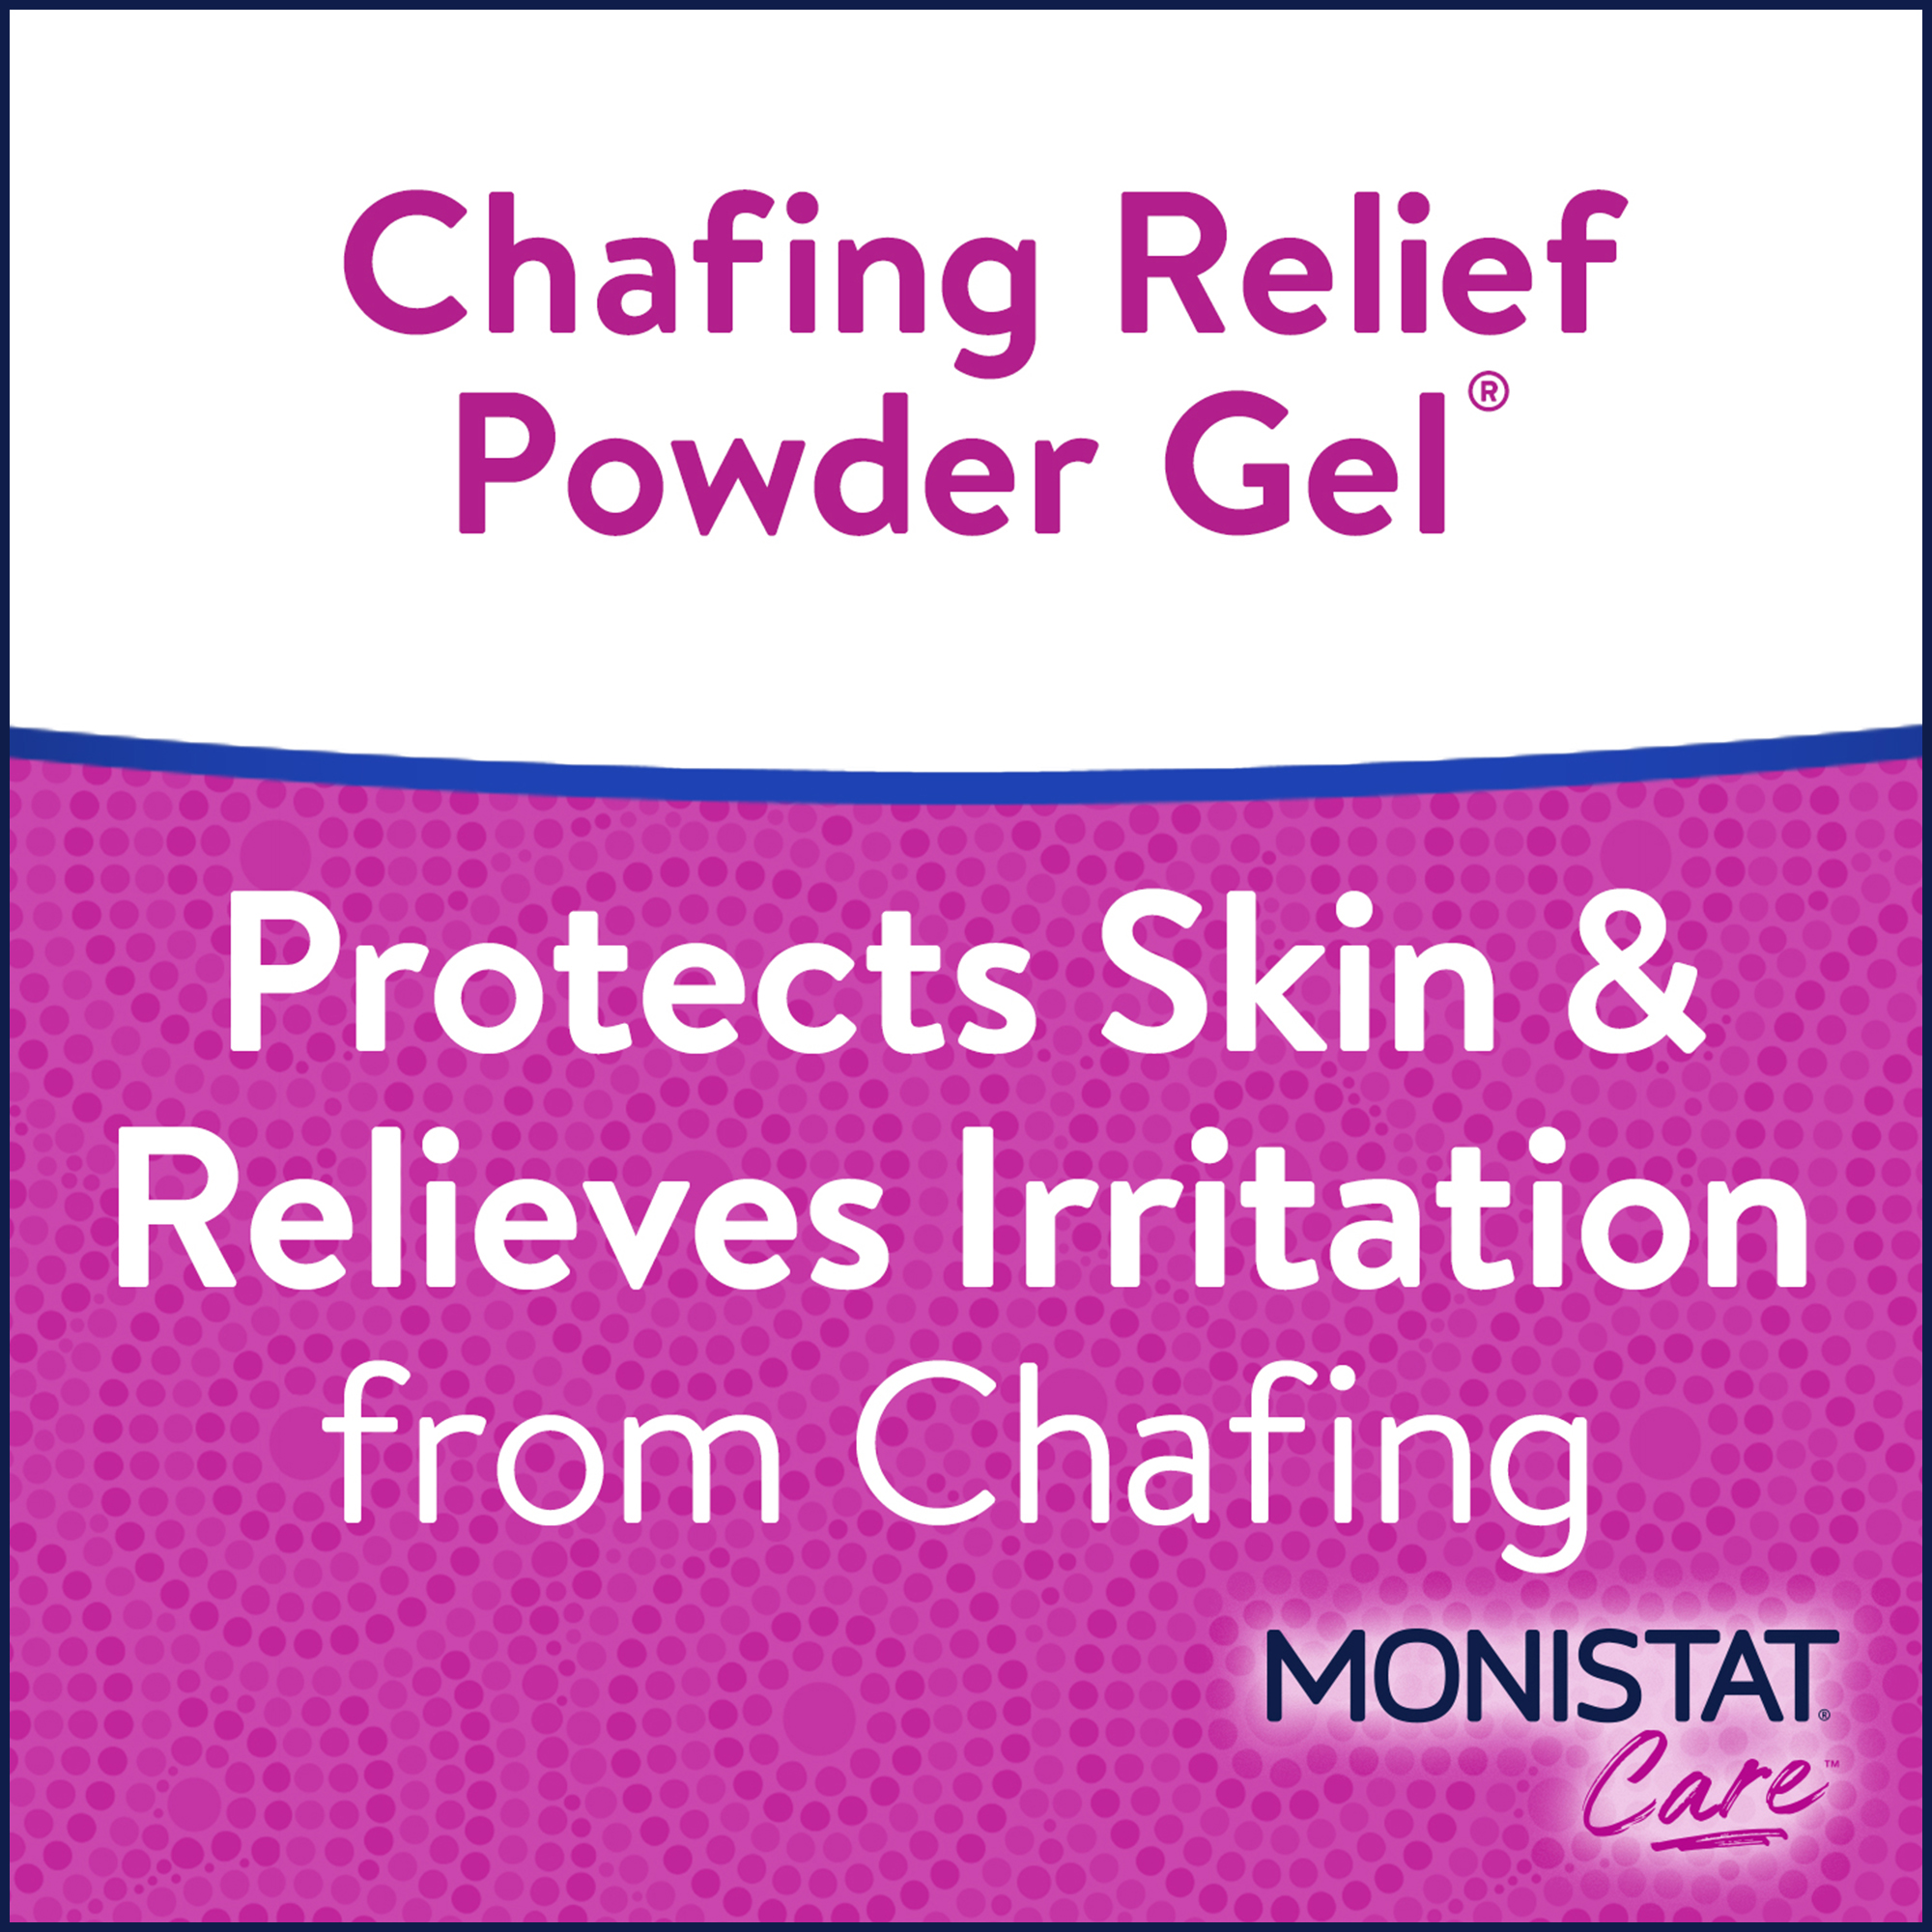 Monistat Chafing Relief Powder Gel, Anti-Chafe Protection, Fragrance Free, 1.5 Oz - image 3 of 13